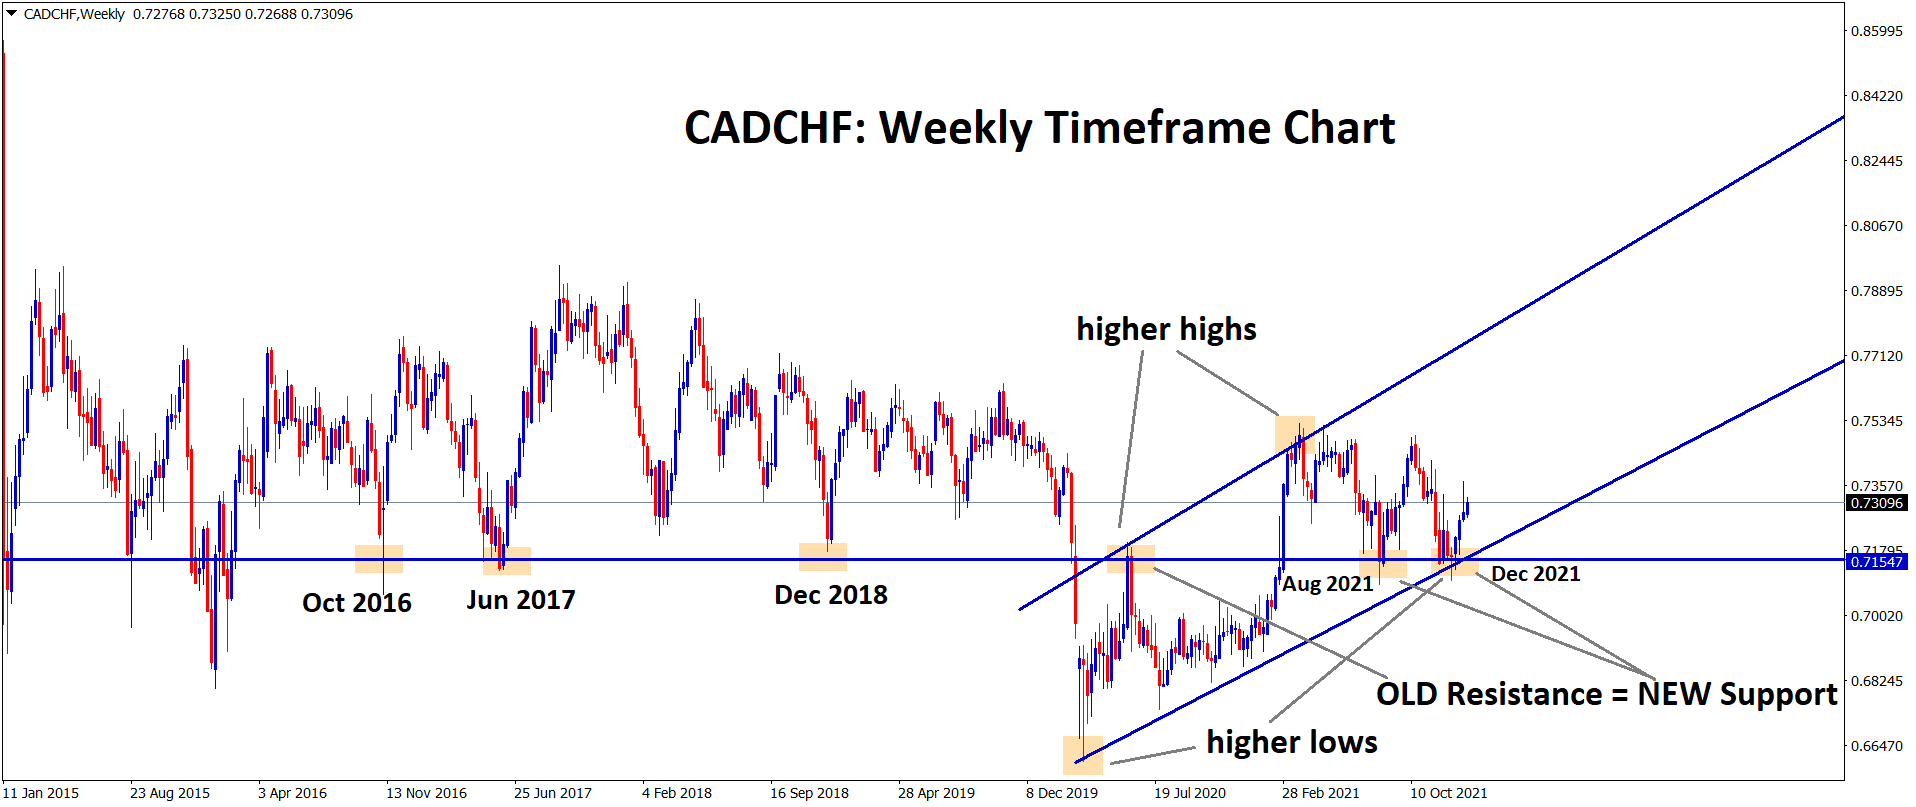 CADCHF is moving in uptrend now